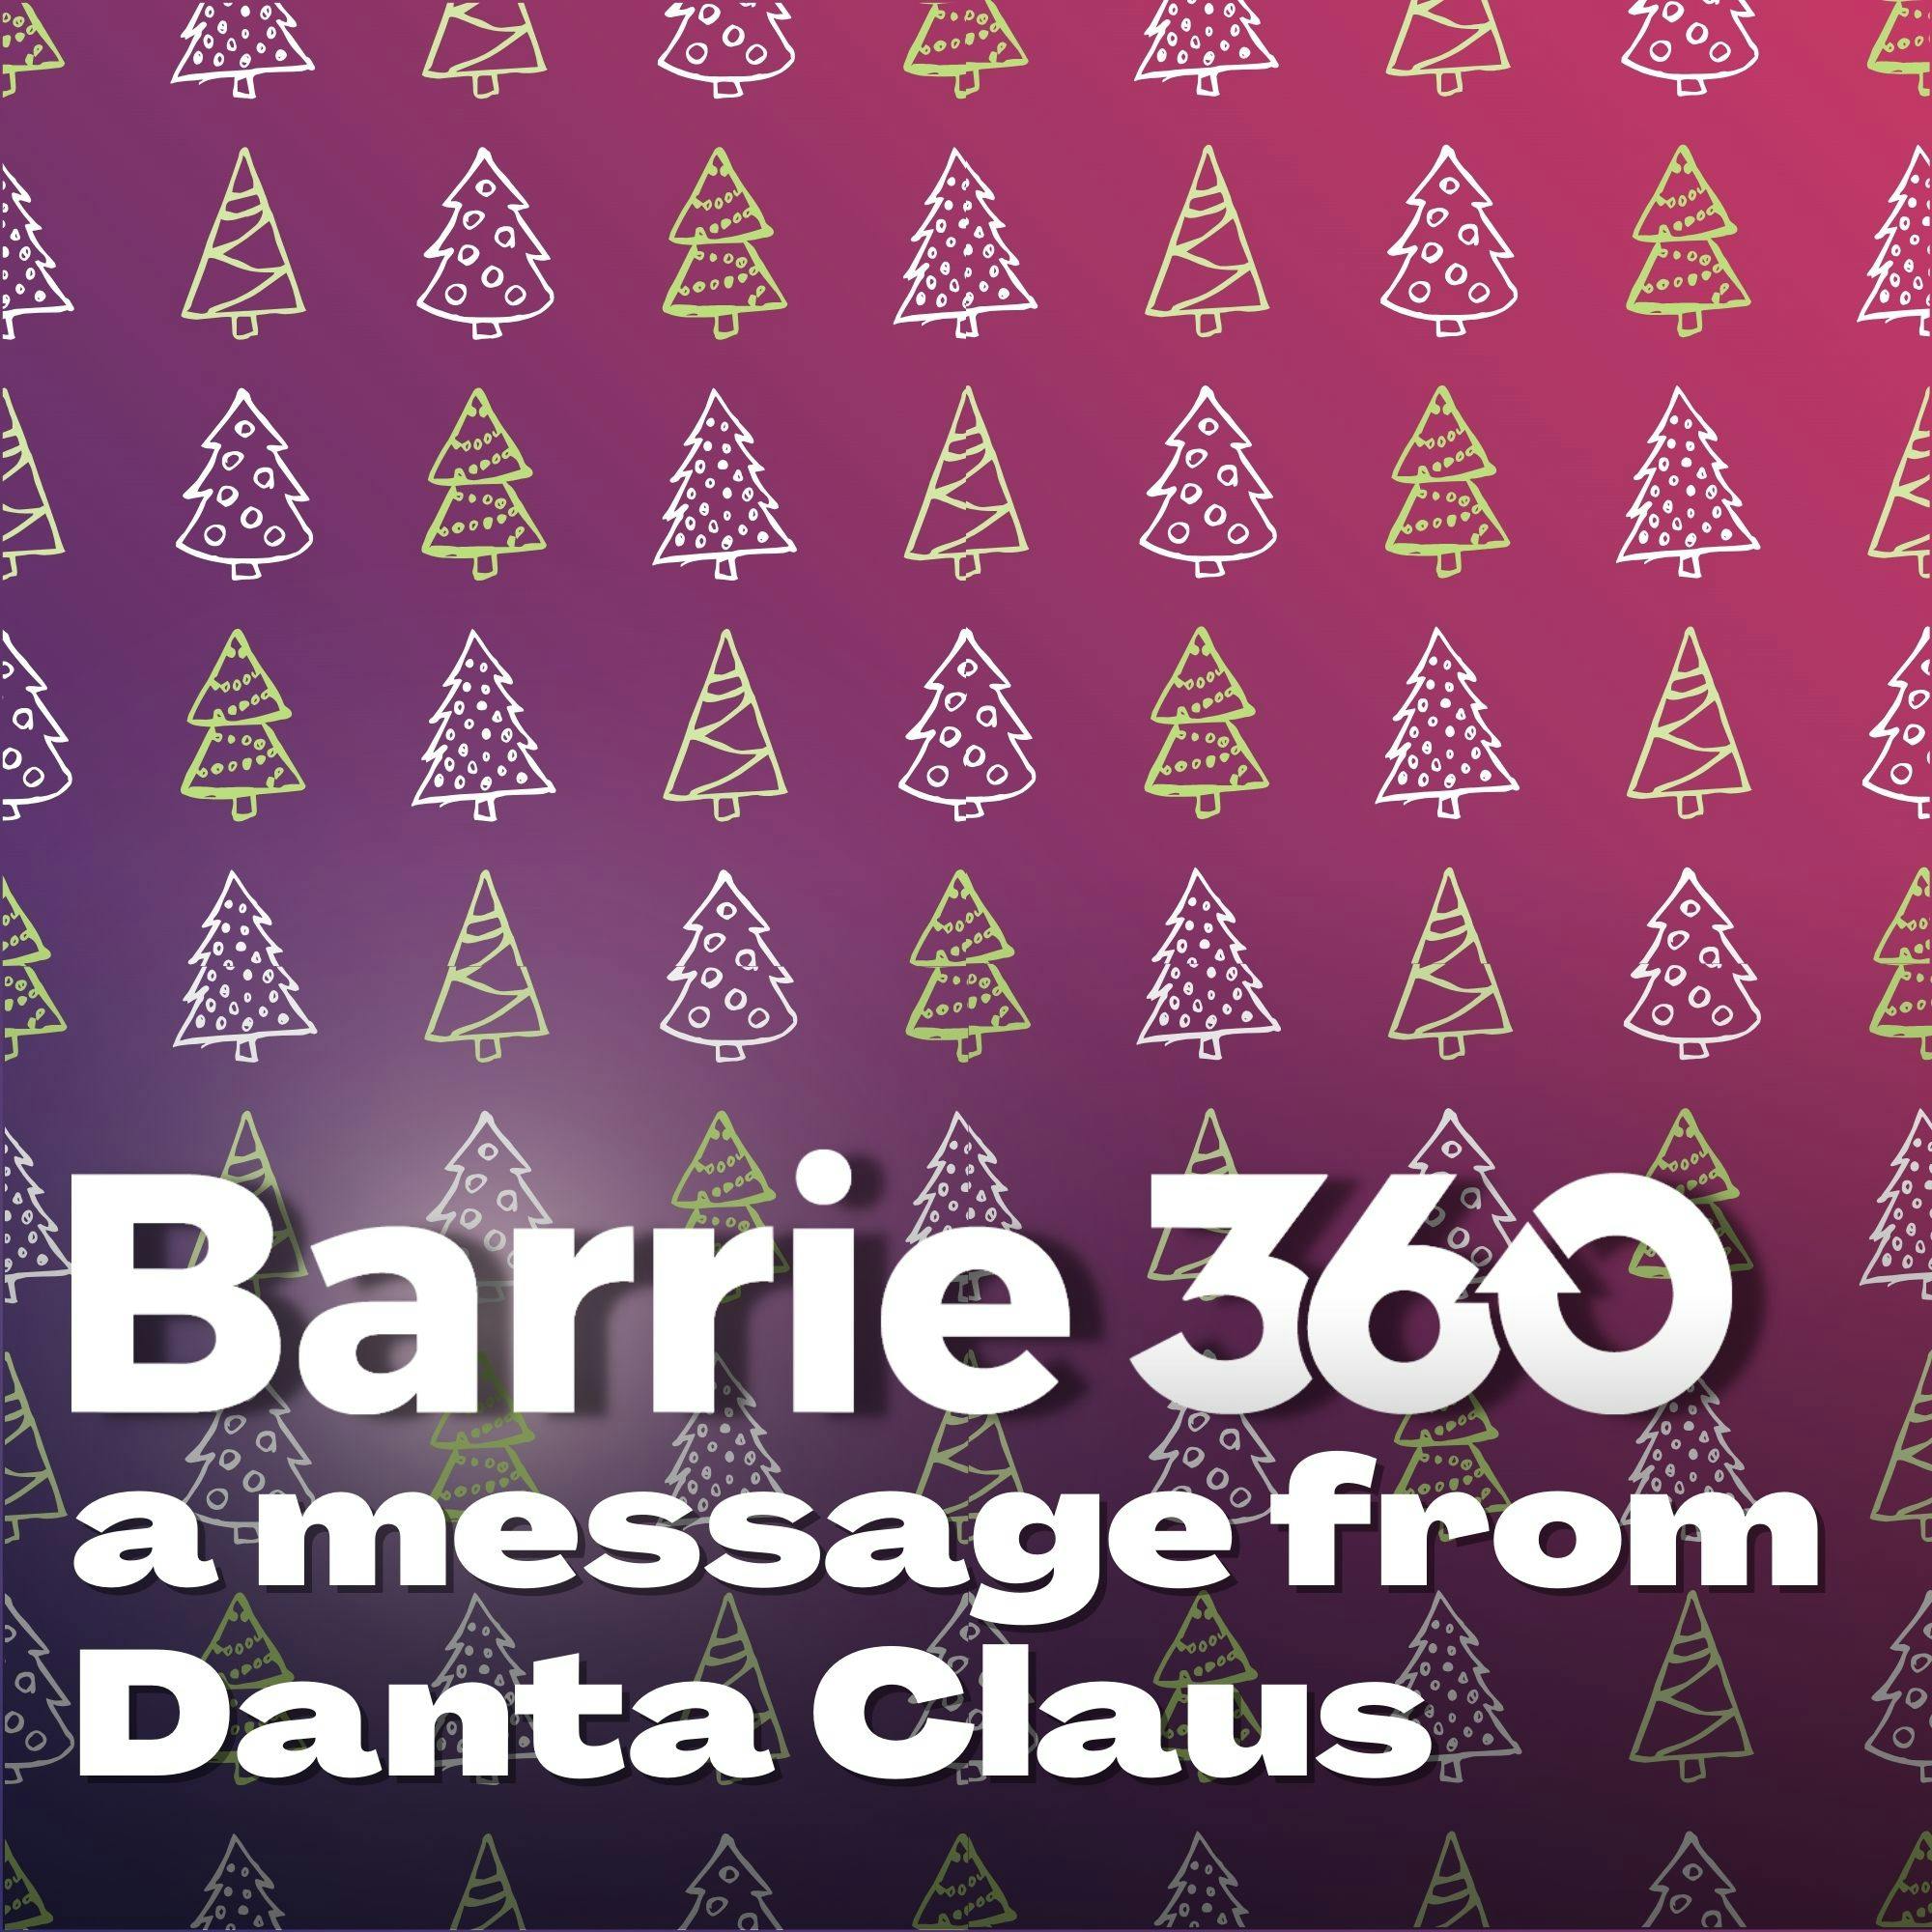 A Holiday Message From Danta Claus